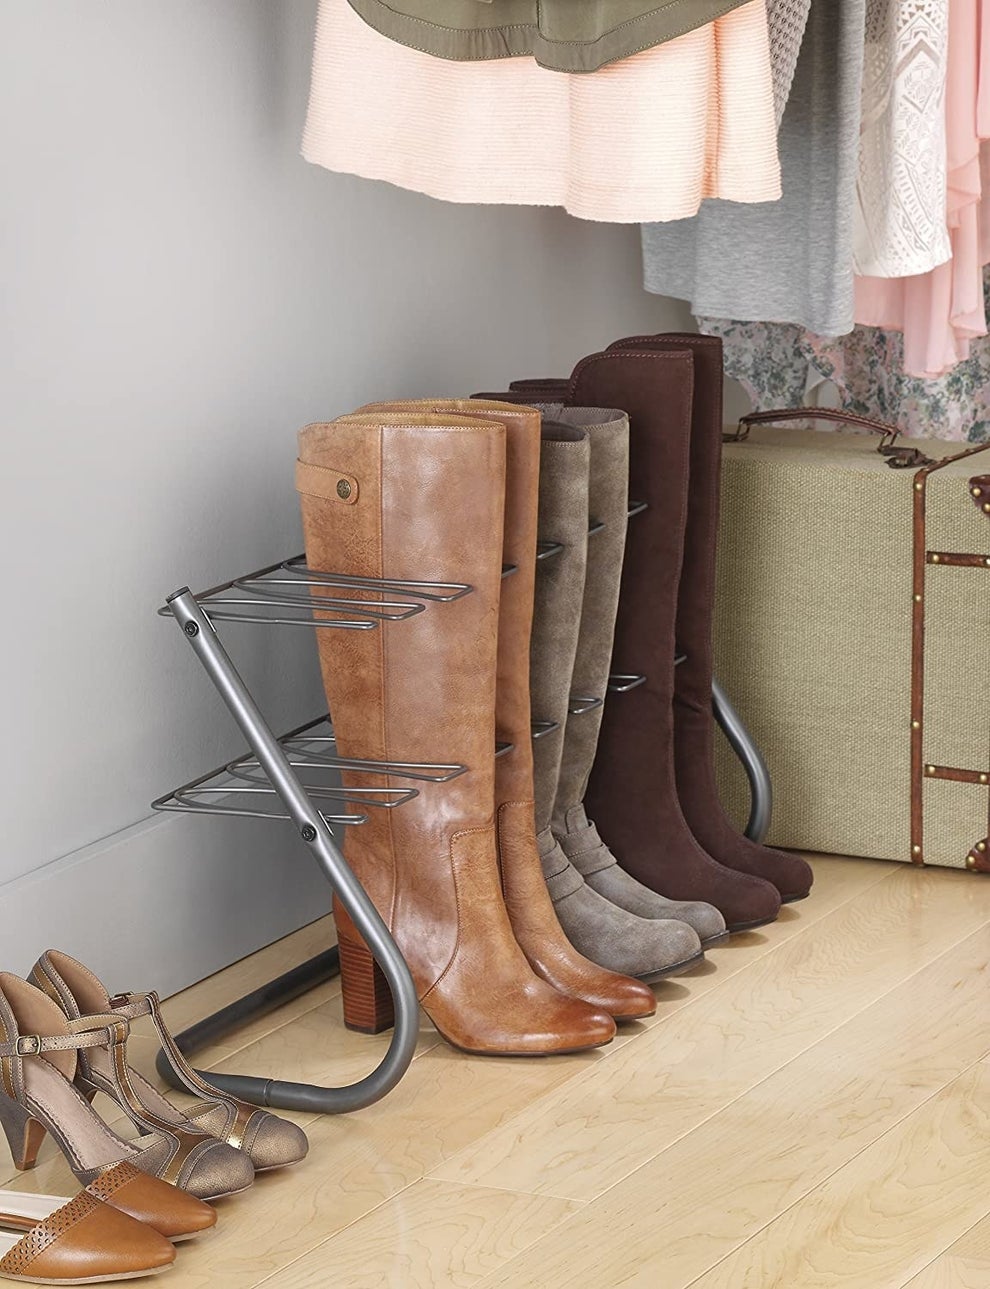 Easy Storage for Winter Boots, Keeps Them Upright-No Slouching or Falling  Over